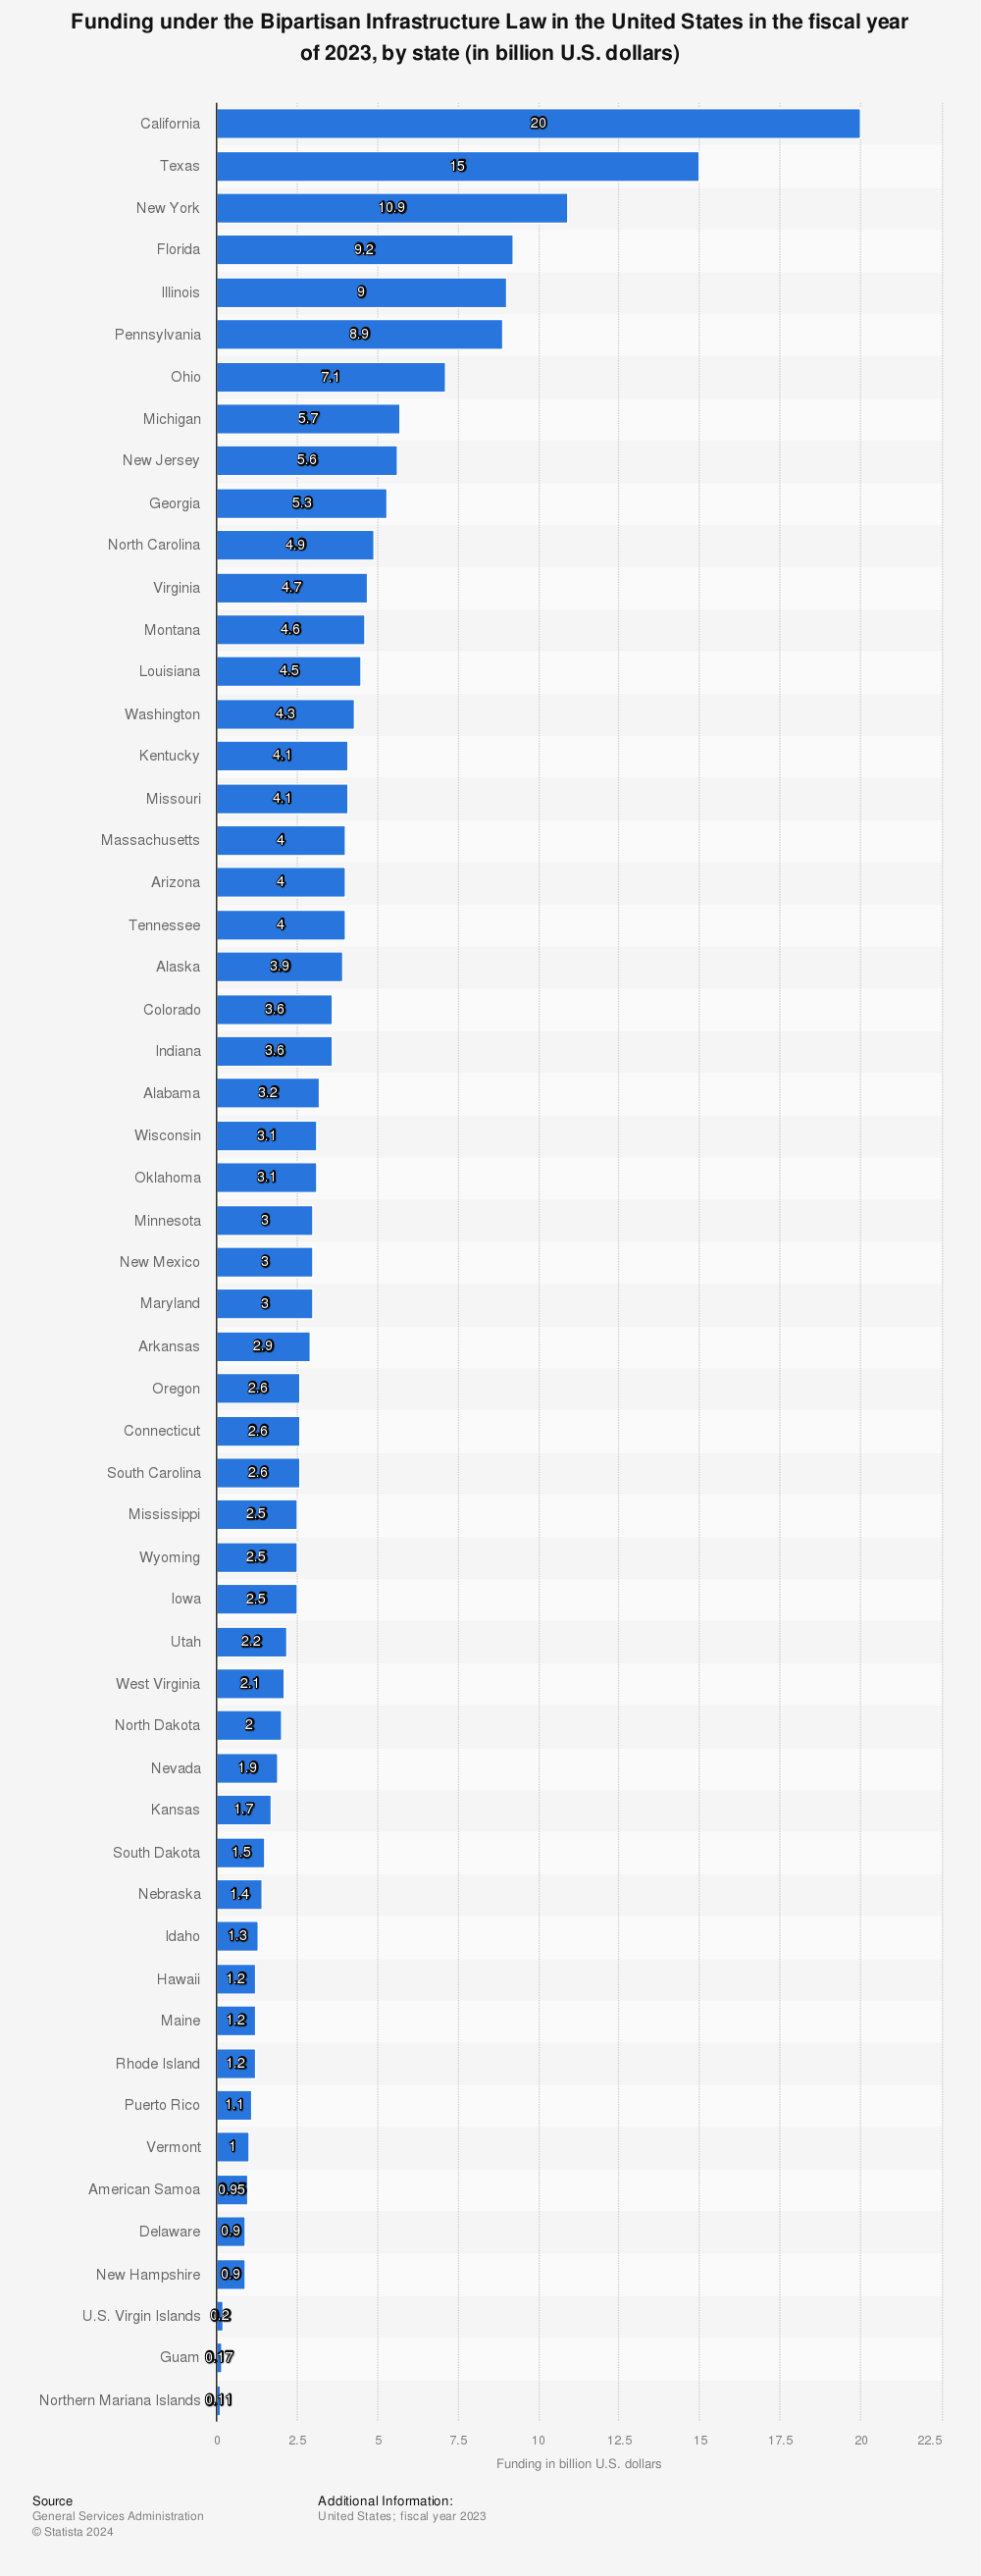 Statistic: Funding under the Bipartisan Infrastructure Law in the United States in the fiscal year of 2023, by state (in billion U.S. dollars) | Statista